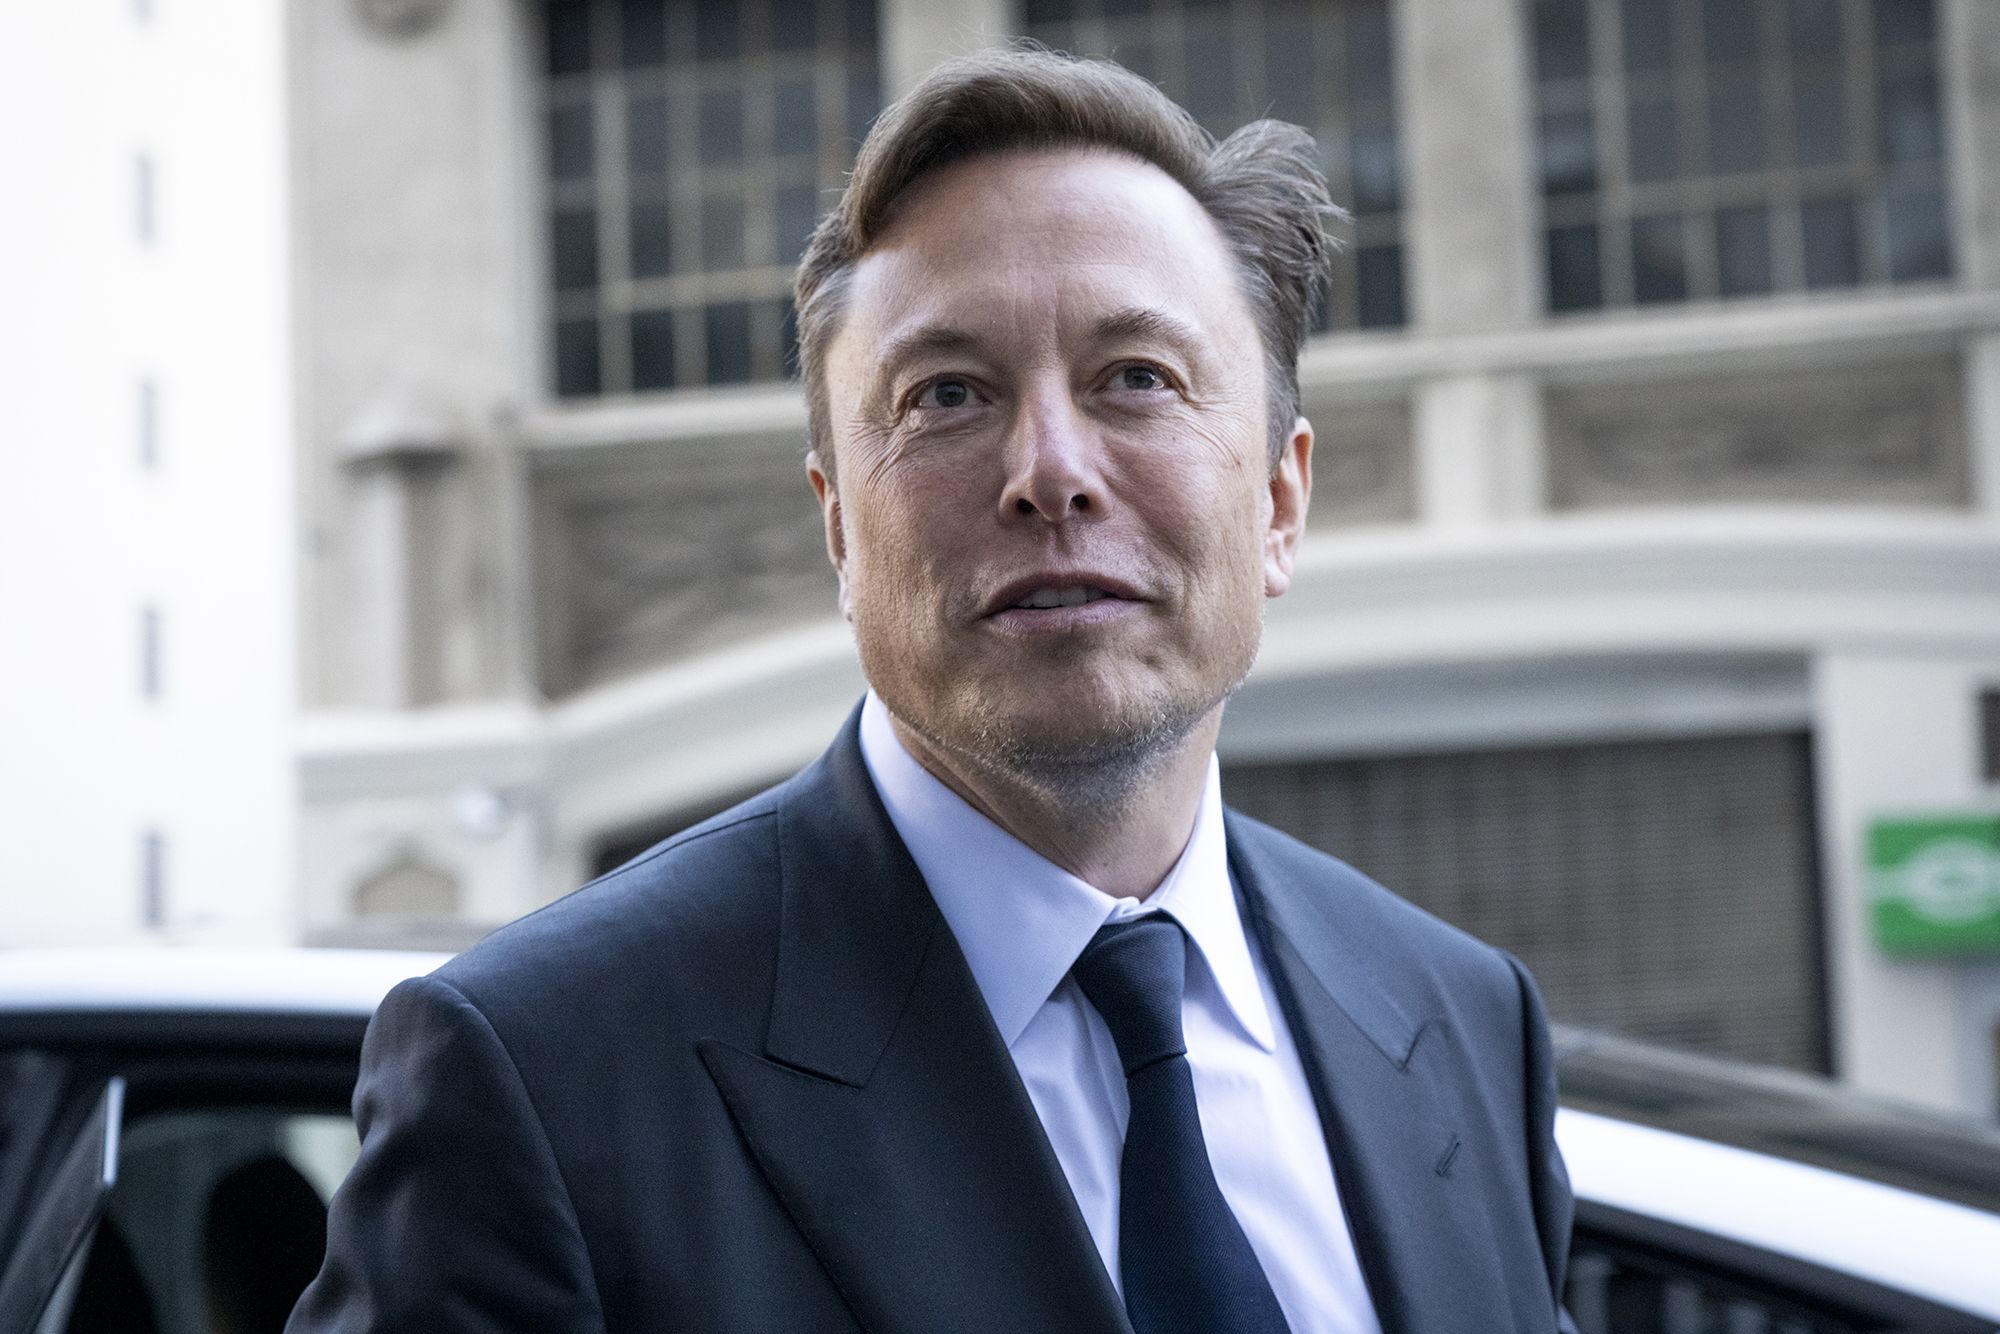 Elon Musk isn't happy that a judge is questioning his pay deal